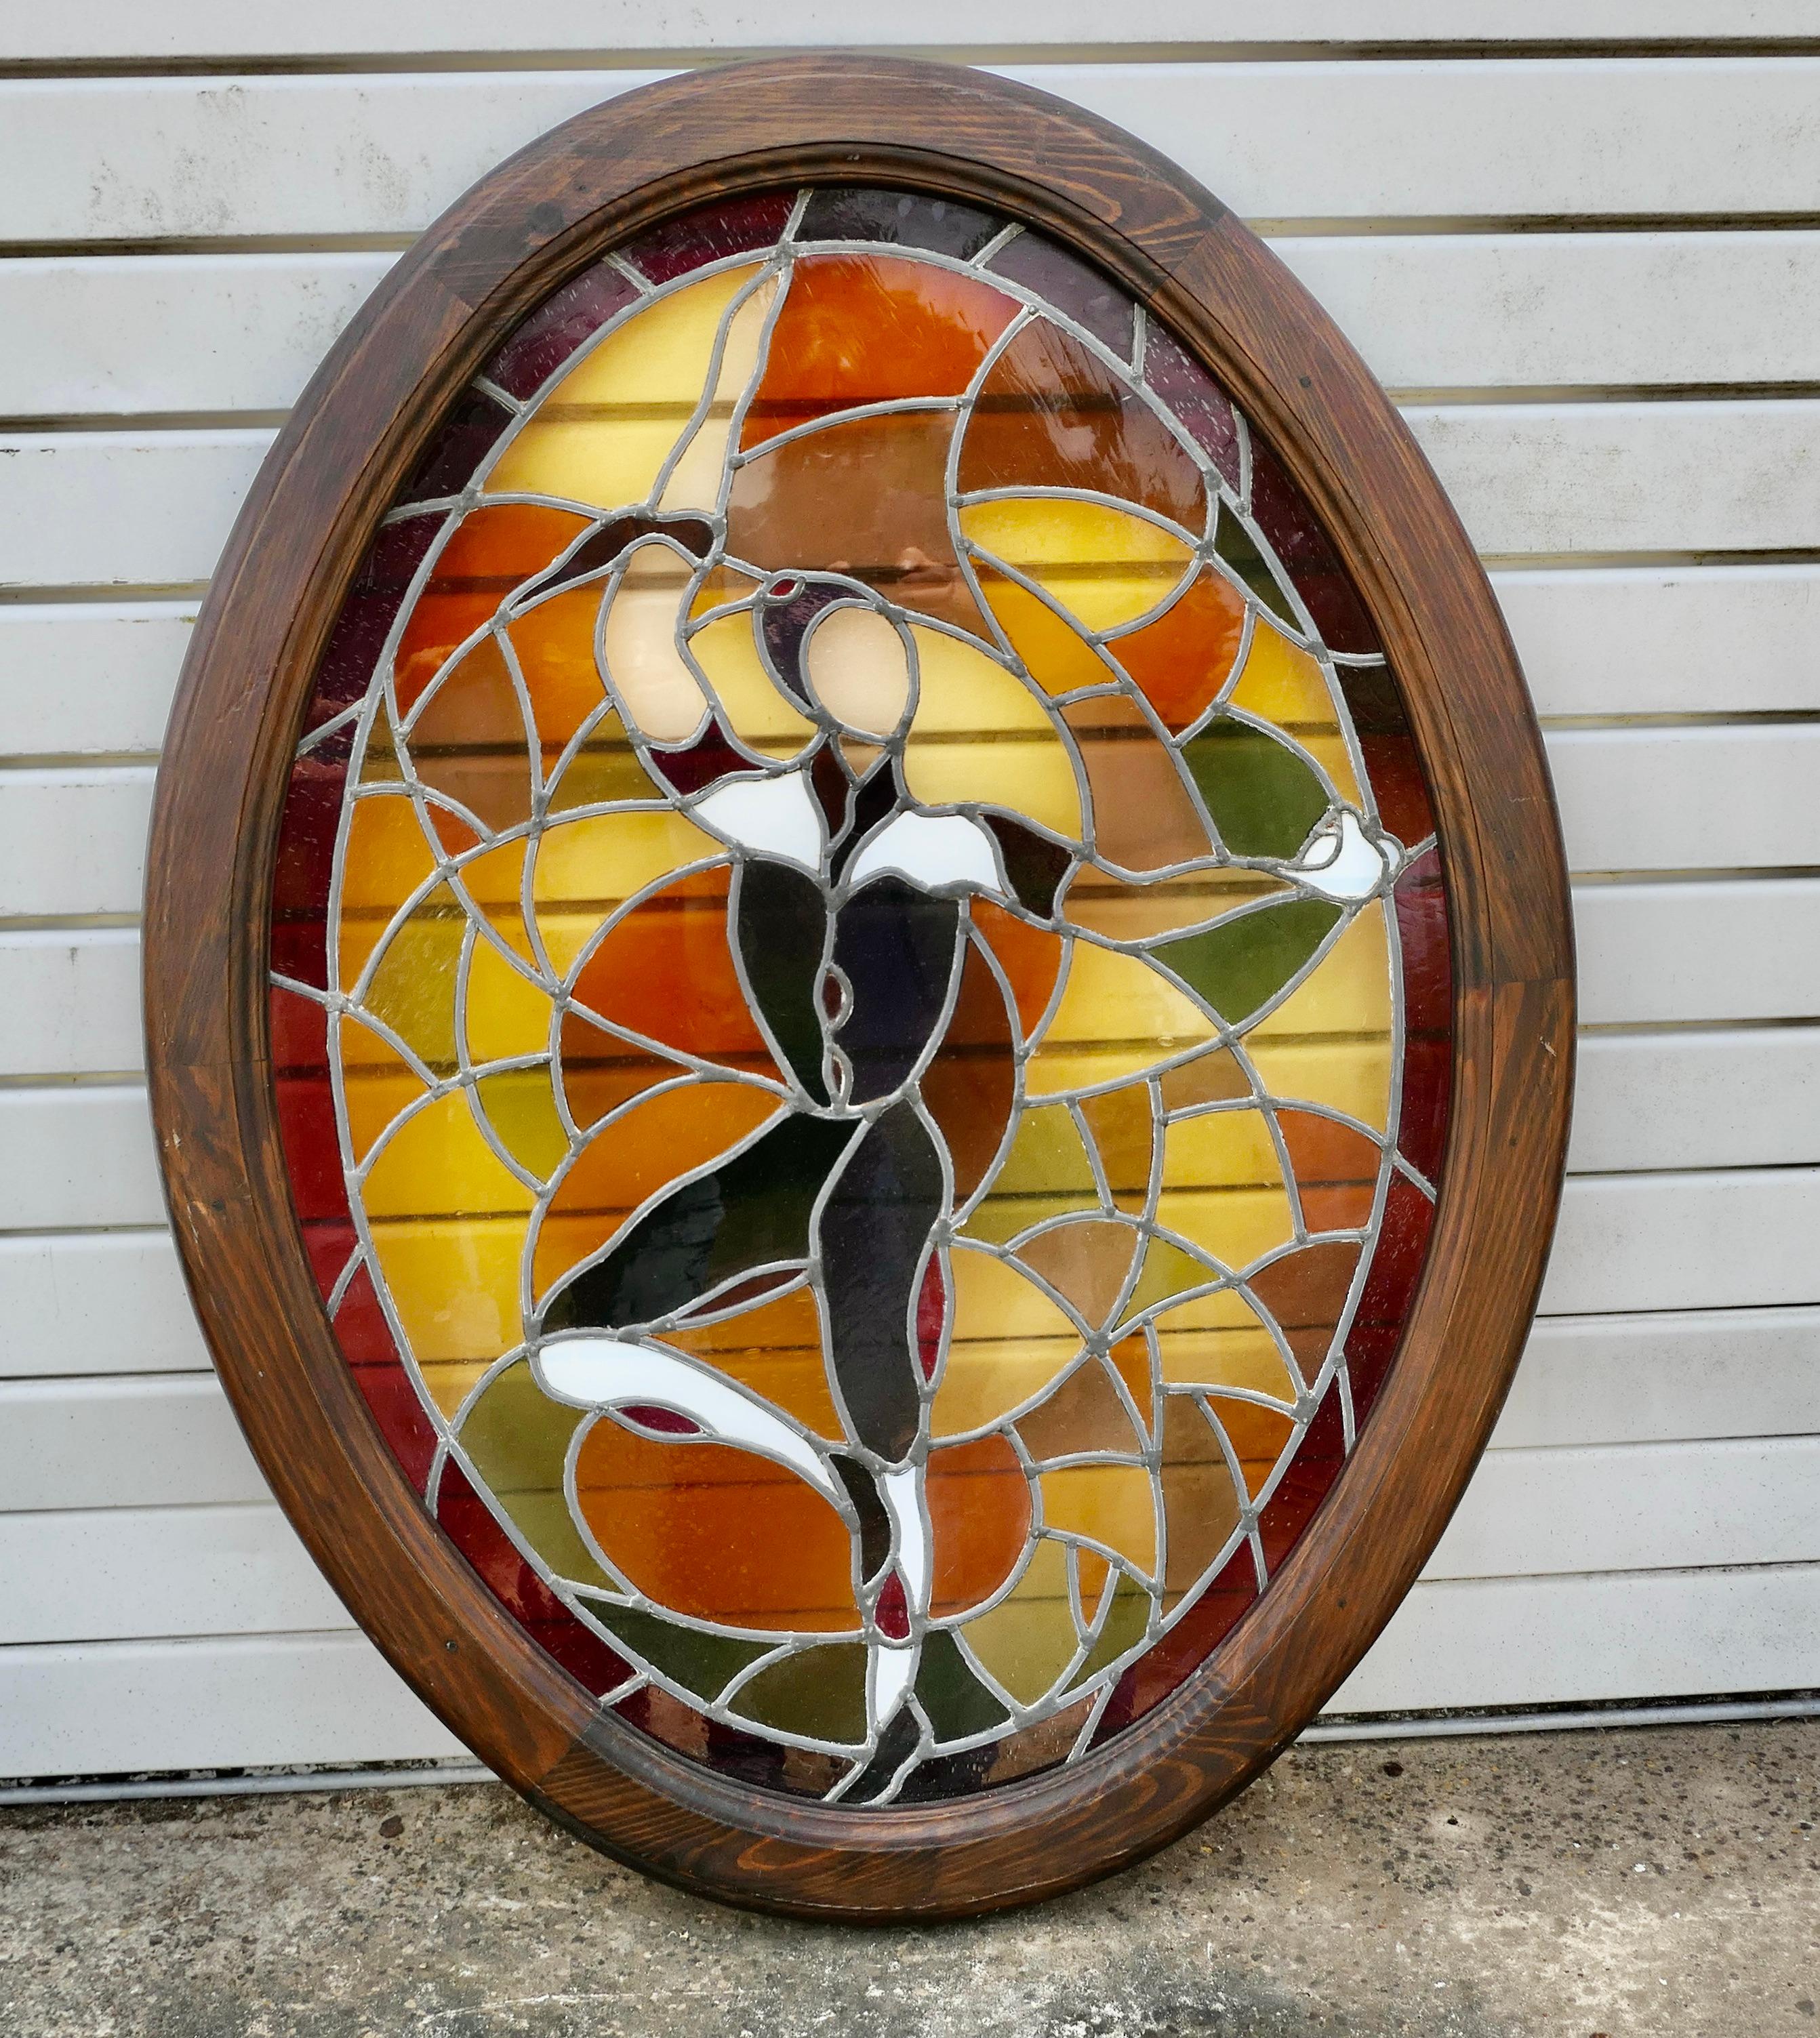 Large French Art Deco Stained Glass Panel for a Window or Door

This is a lovely piece, it has very attractive leaded glass in beautiful autumn colours with a handsome dancer set in the centre
The glass has been built into an Oval solid wooden 3”